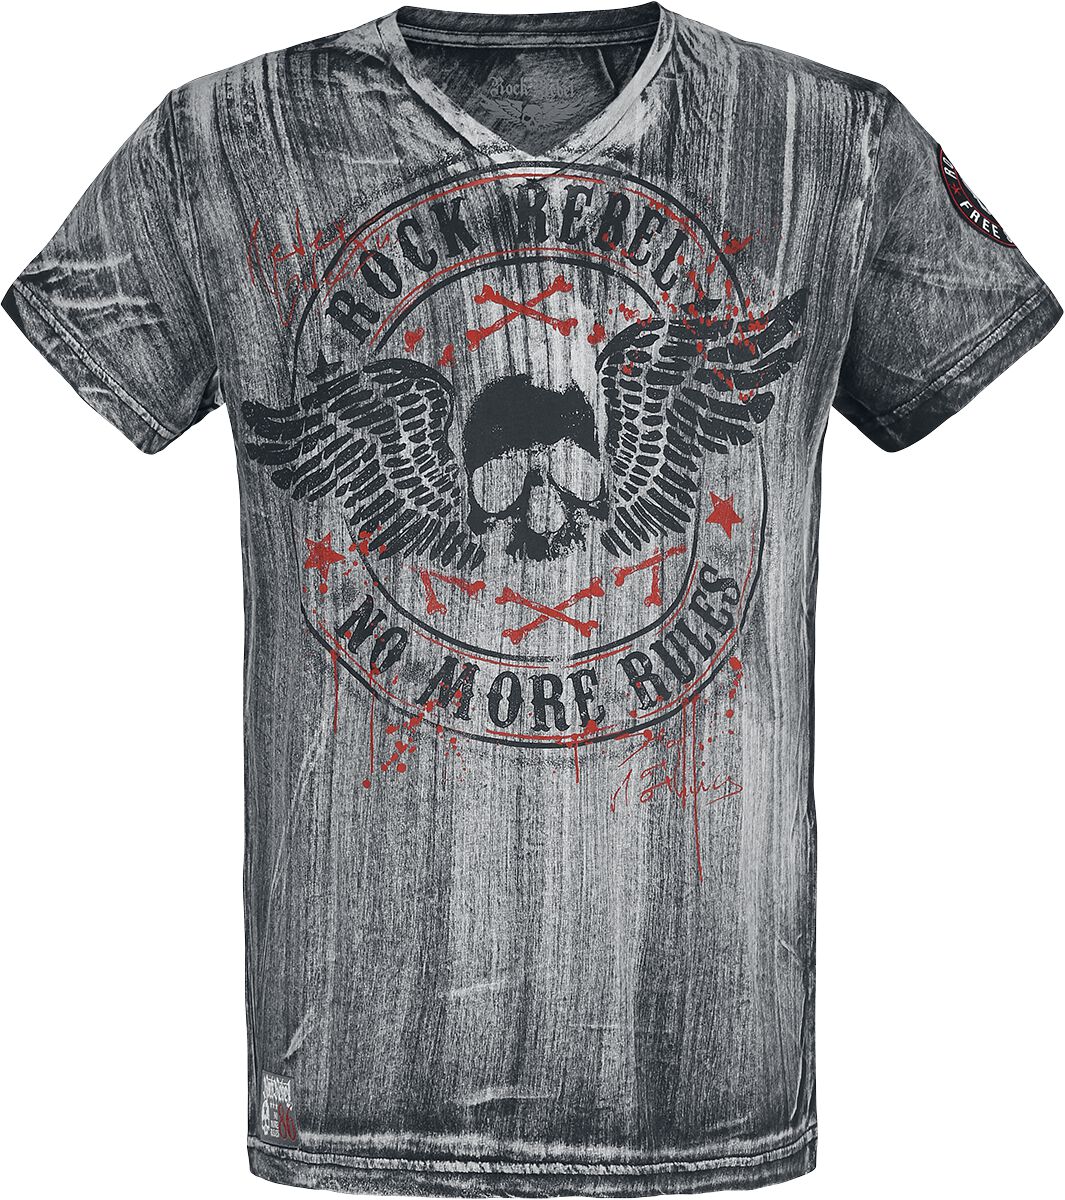 Image of T-Shirt di Rock Rebel by EMP - Grey T-shirt with V-Neckline and Print - M a 5XL - Uomo - grigio